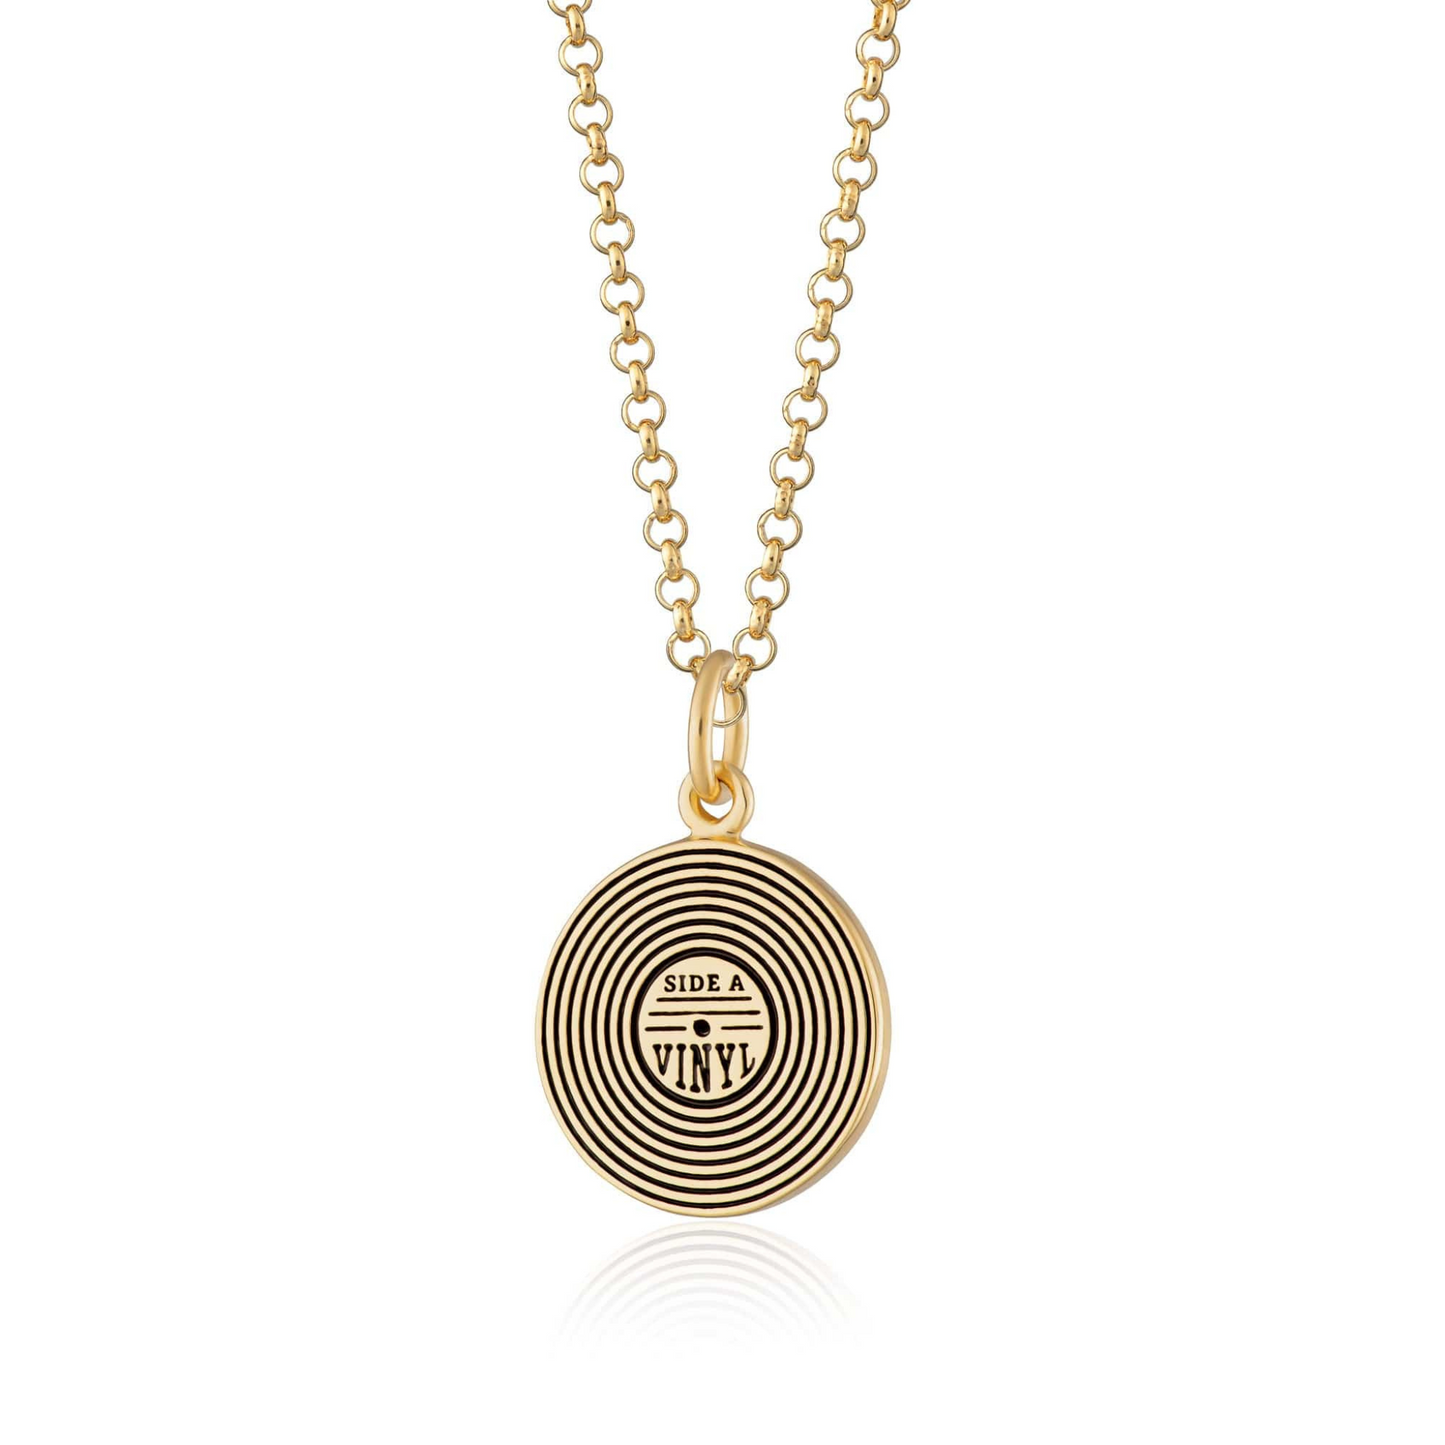 gold necklace with vinyl charm.